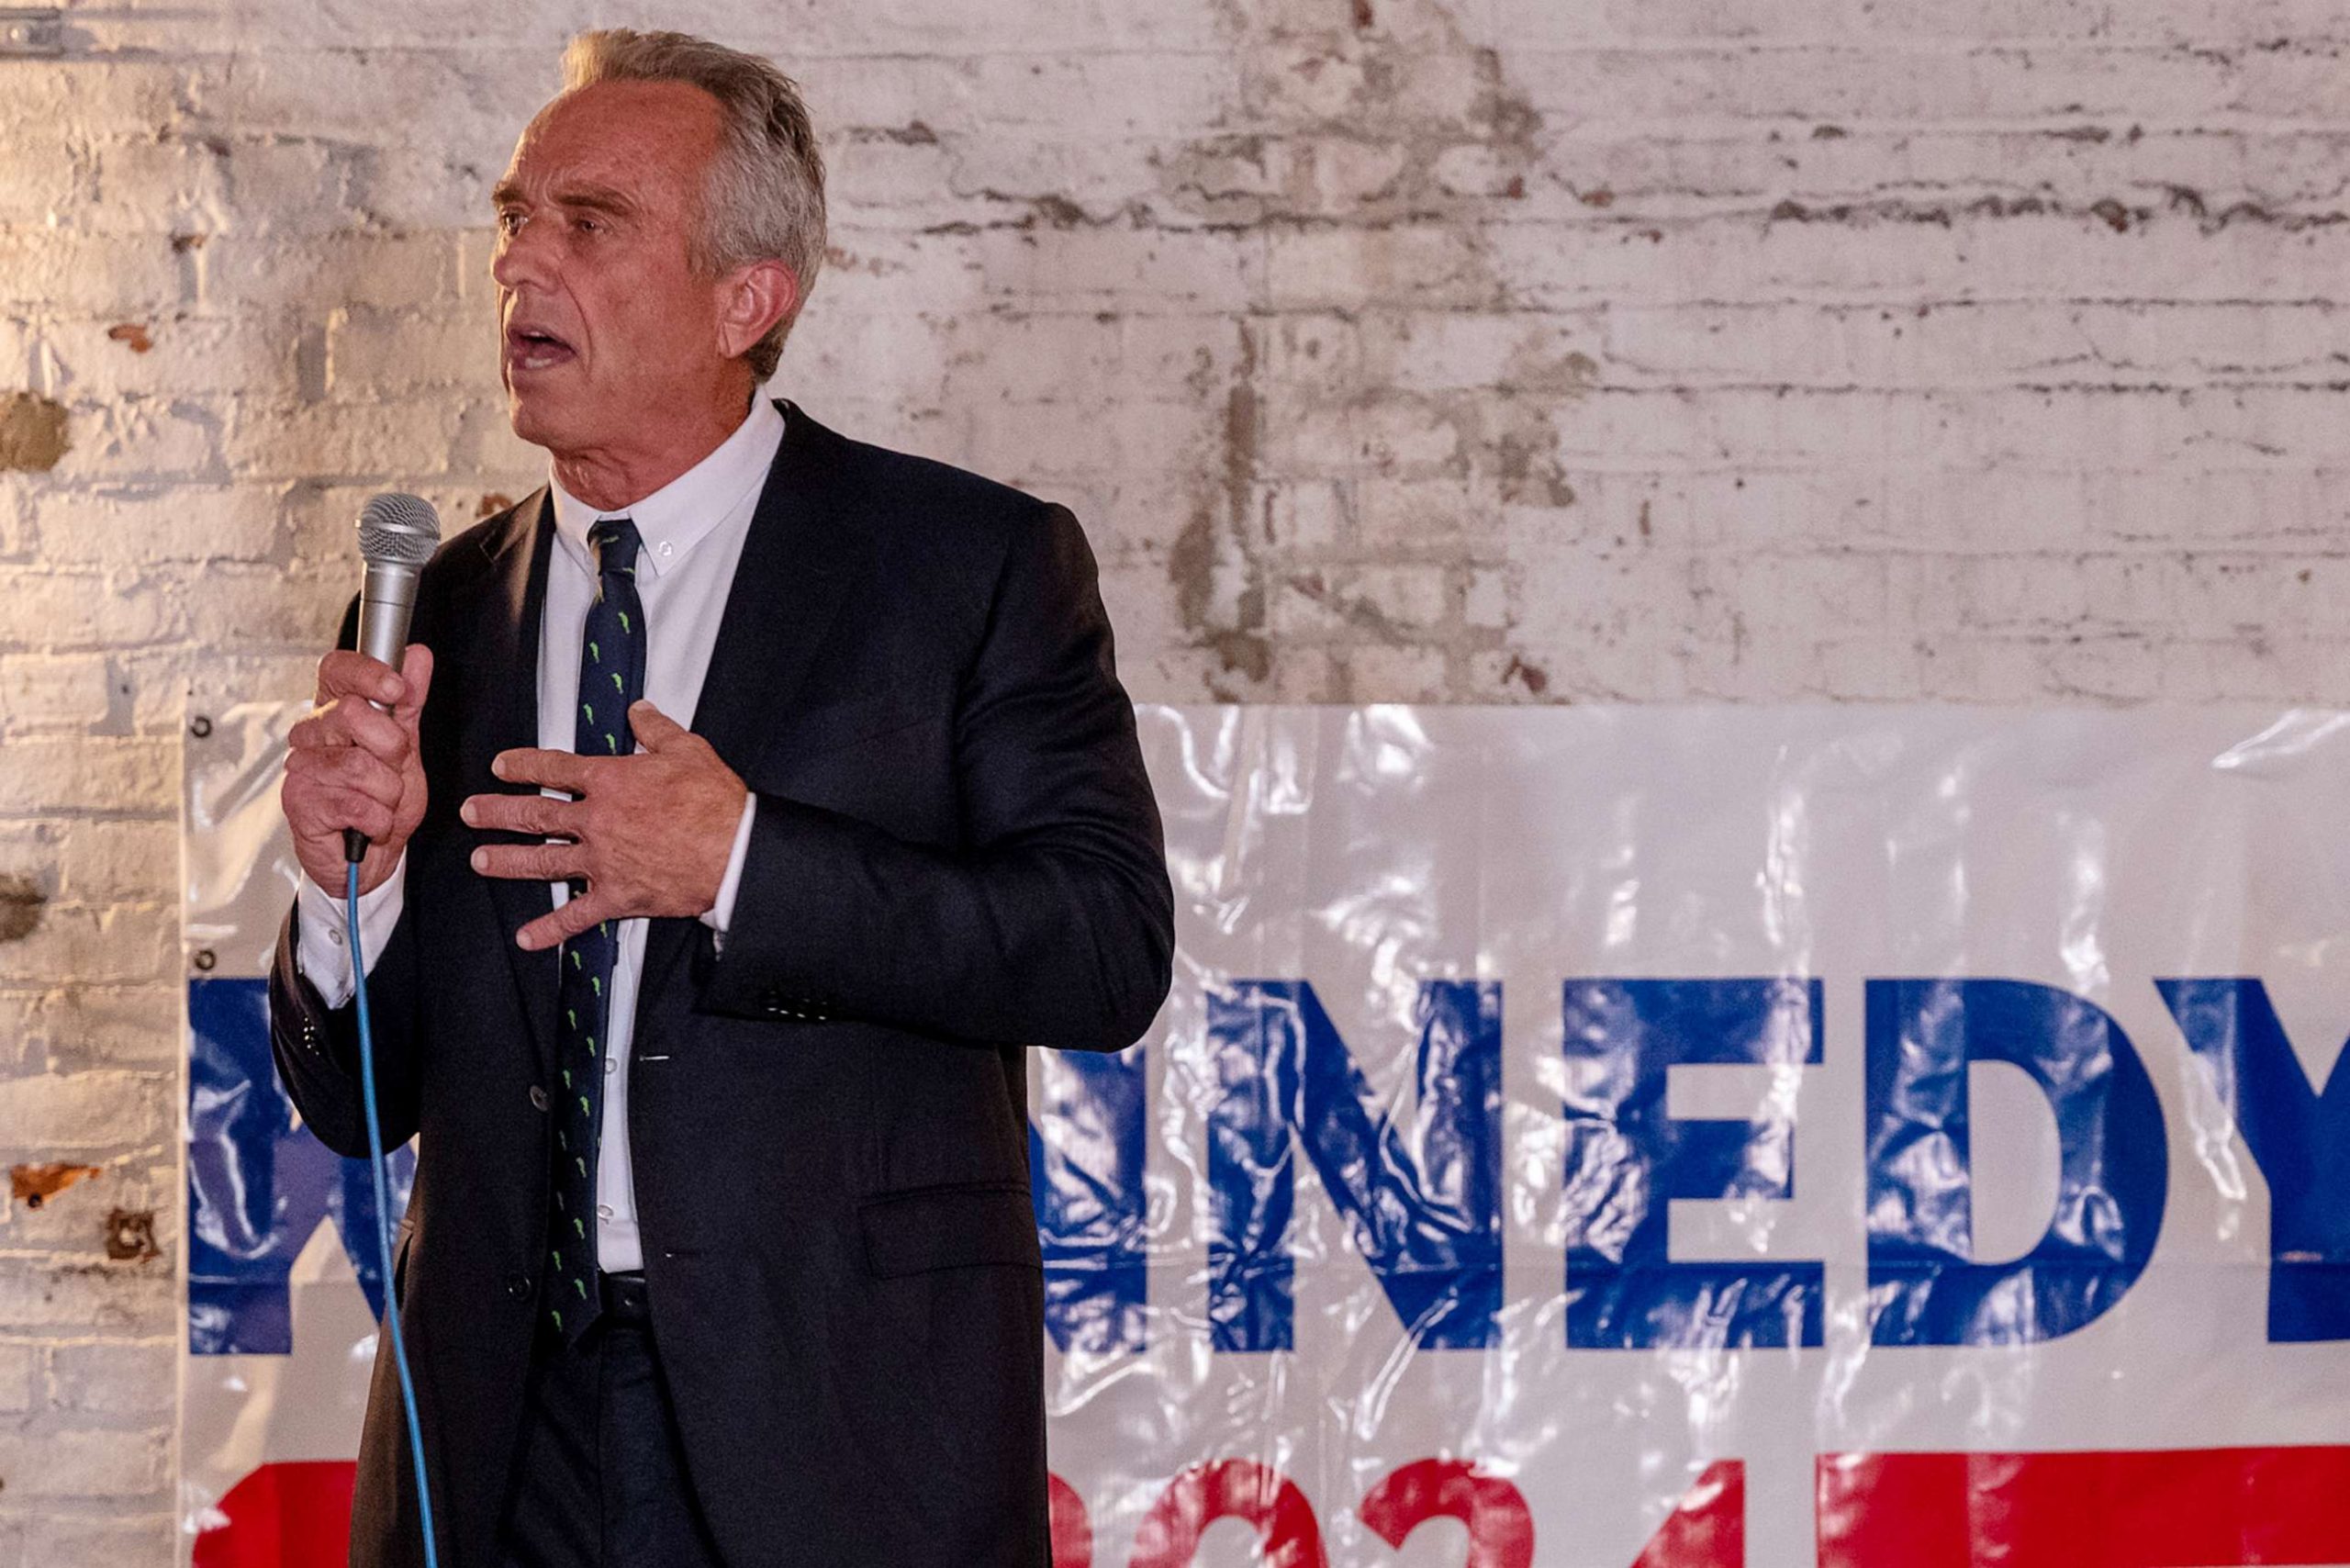 Man with weapon apprehended at Robert F. Kennedy Jr. campaign gathering in Los Angeles